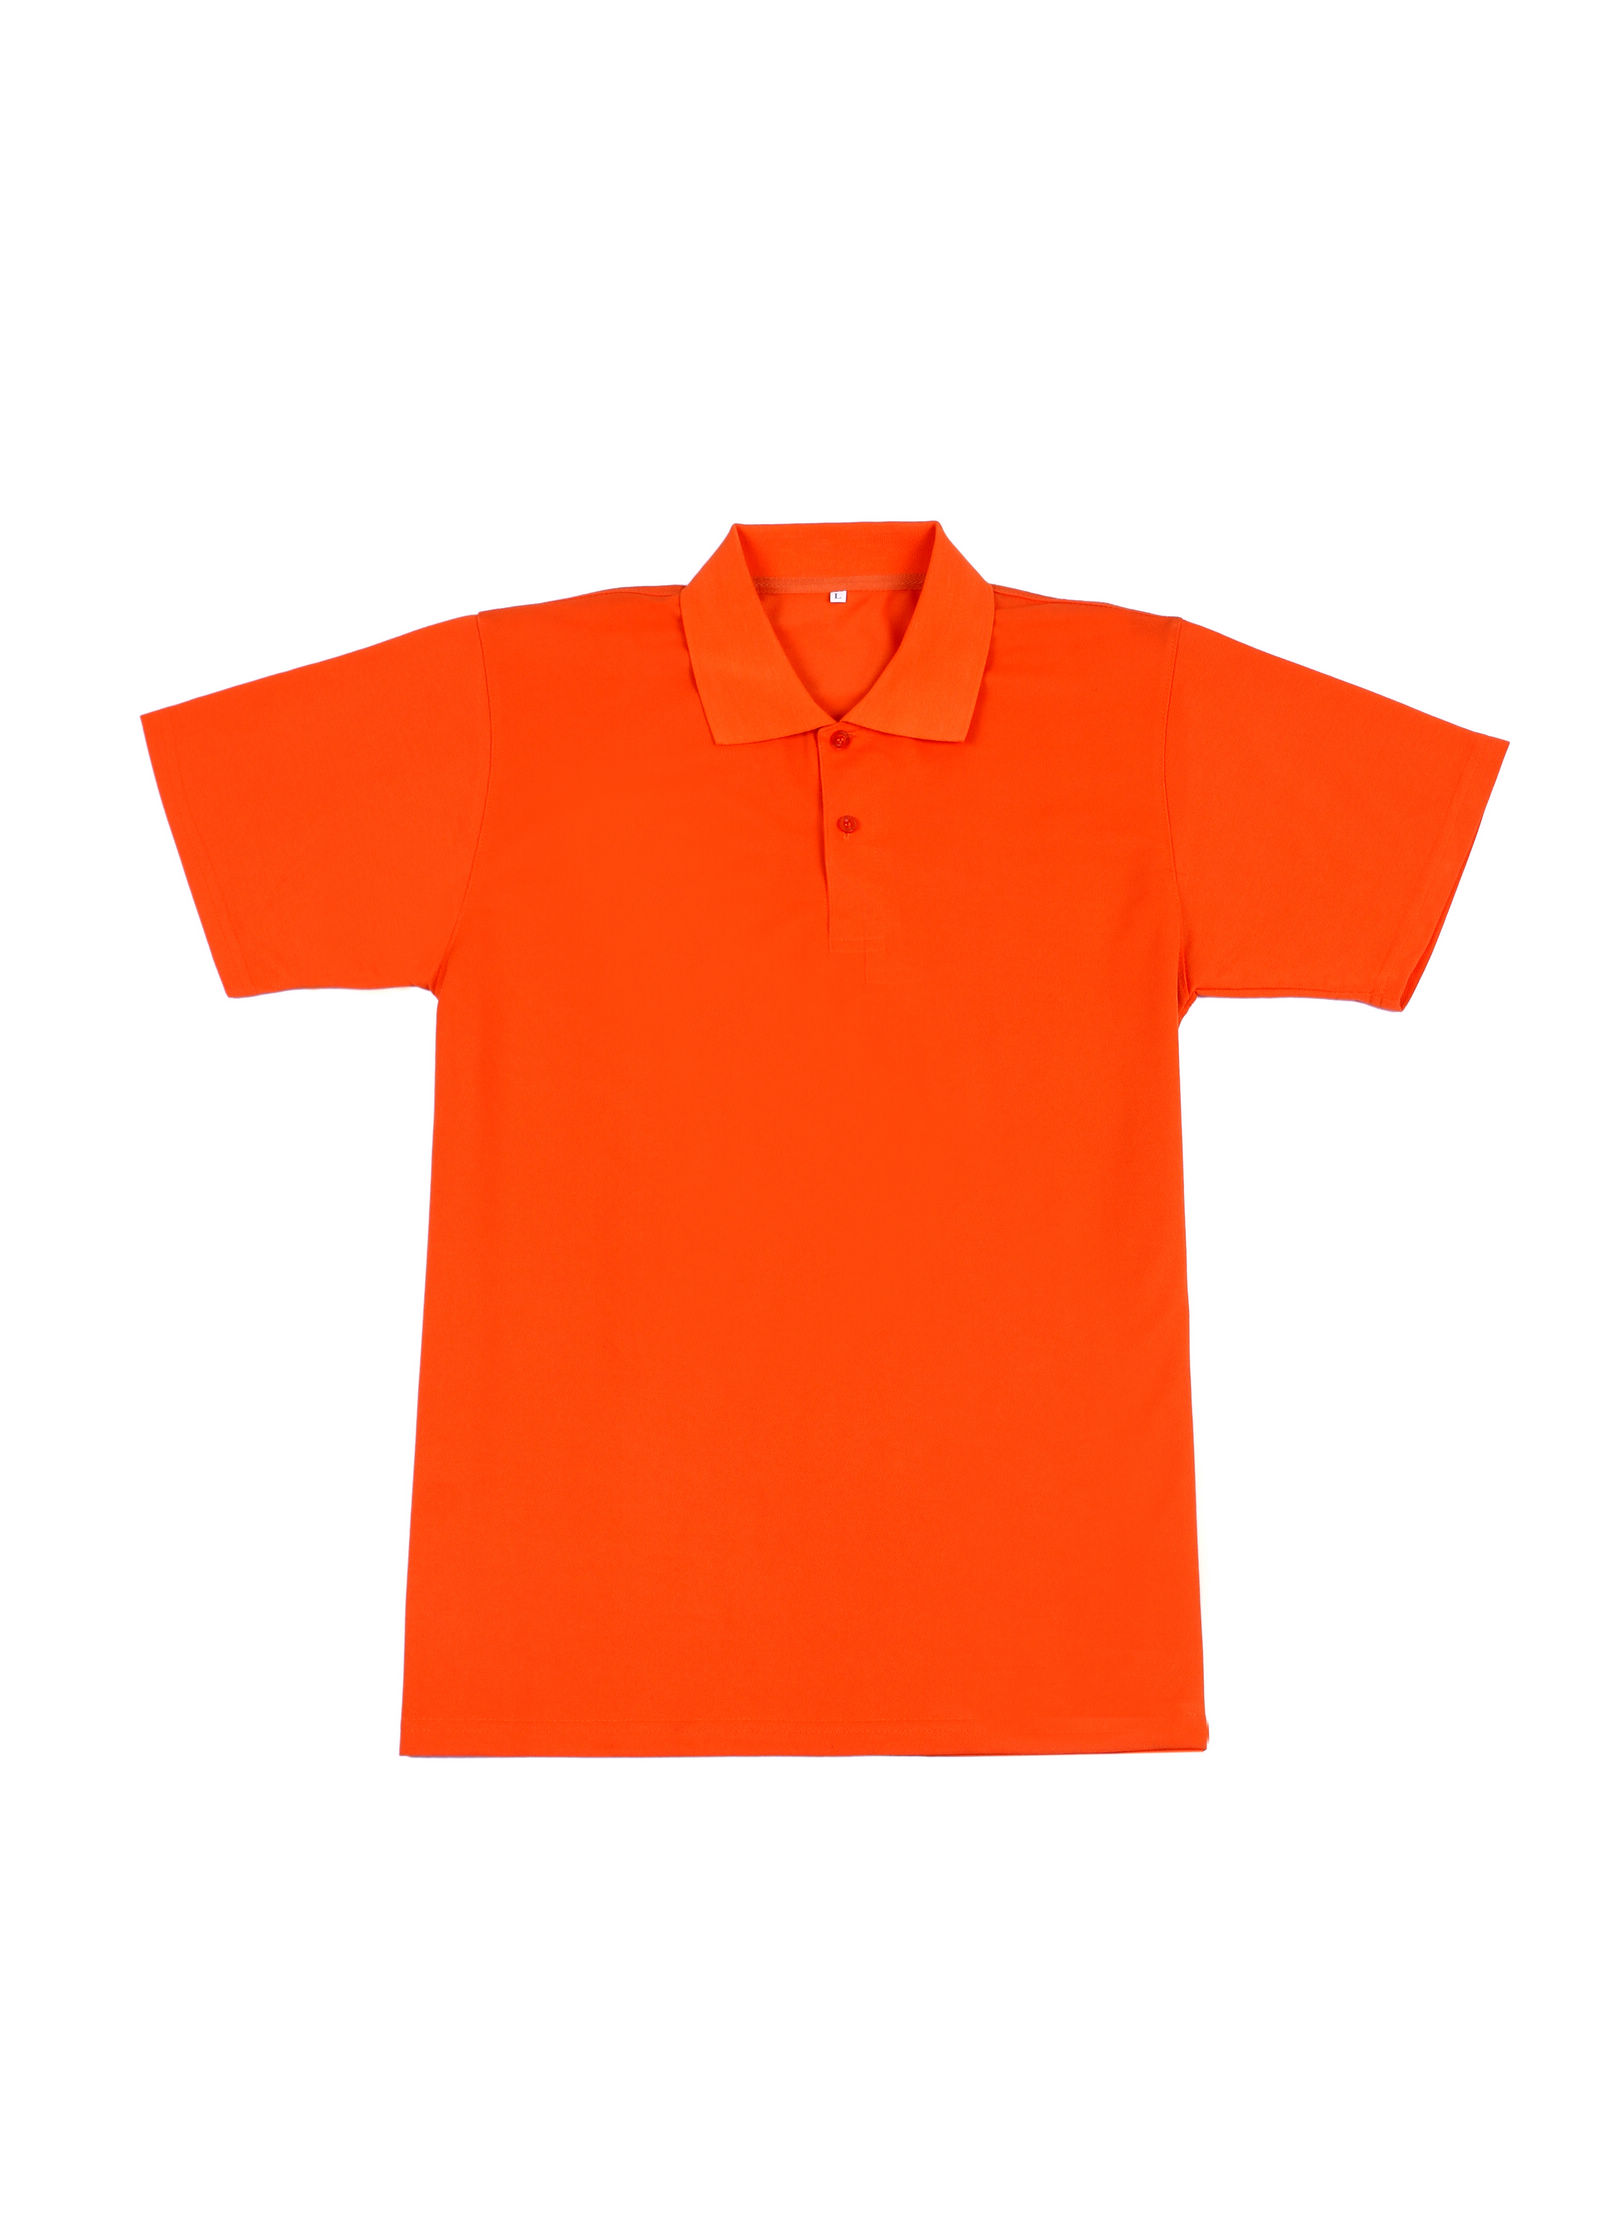 Free Polo Shirts - ClipArt Best